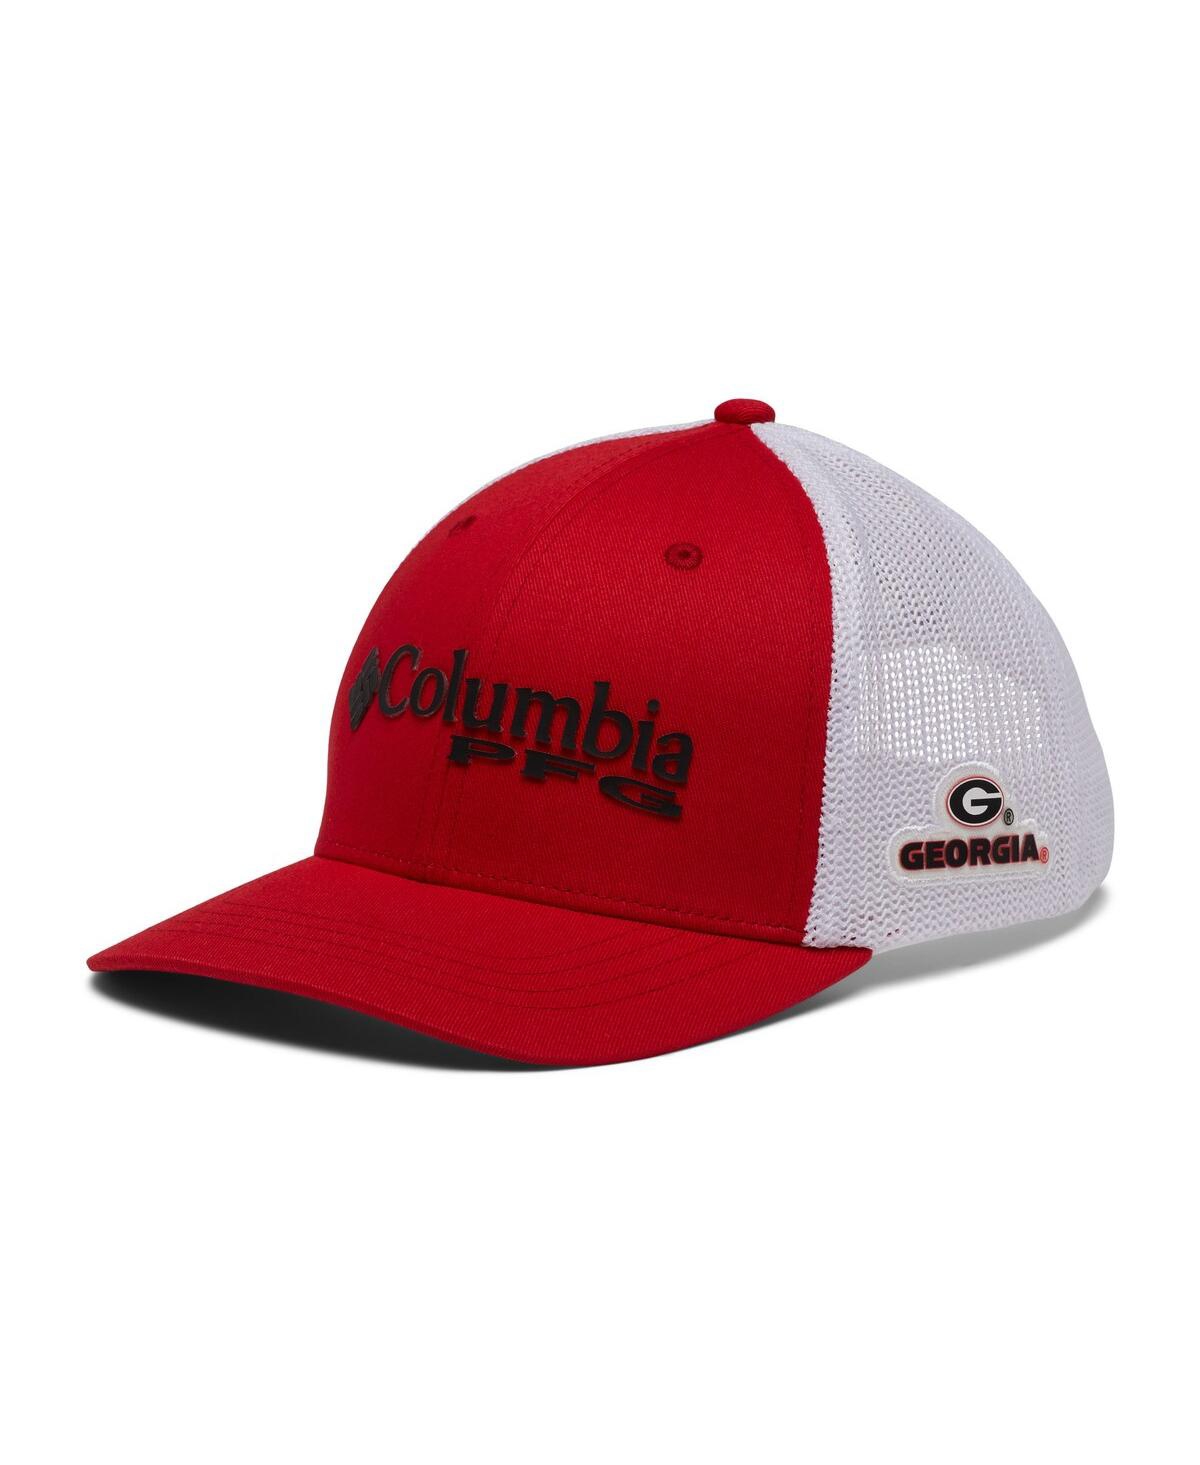 Youth Red Georgia Bulldogs Pfg Adjustable Hat - Red